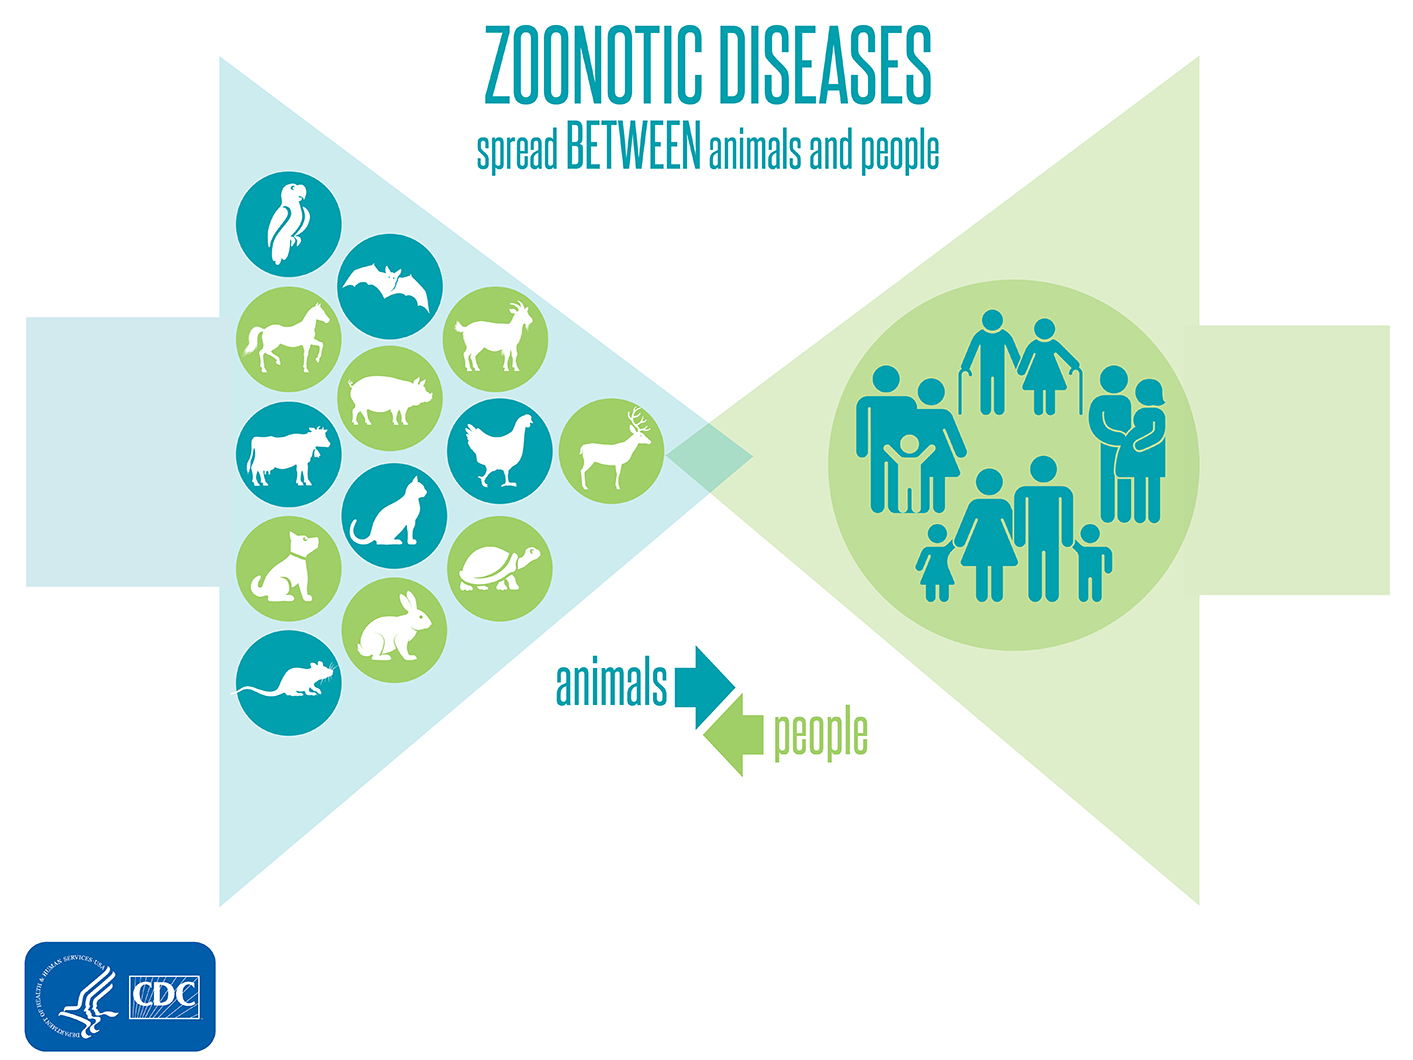 Zoonotic diseases spread between animals and people